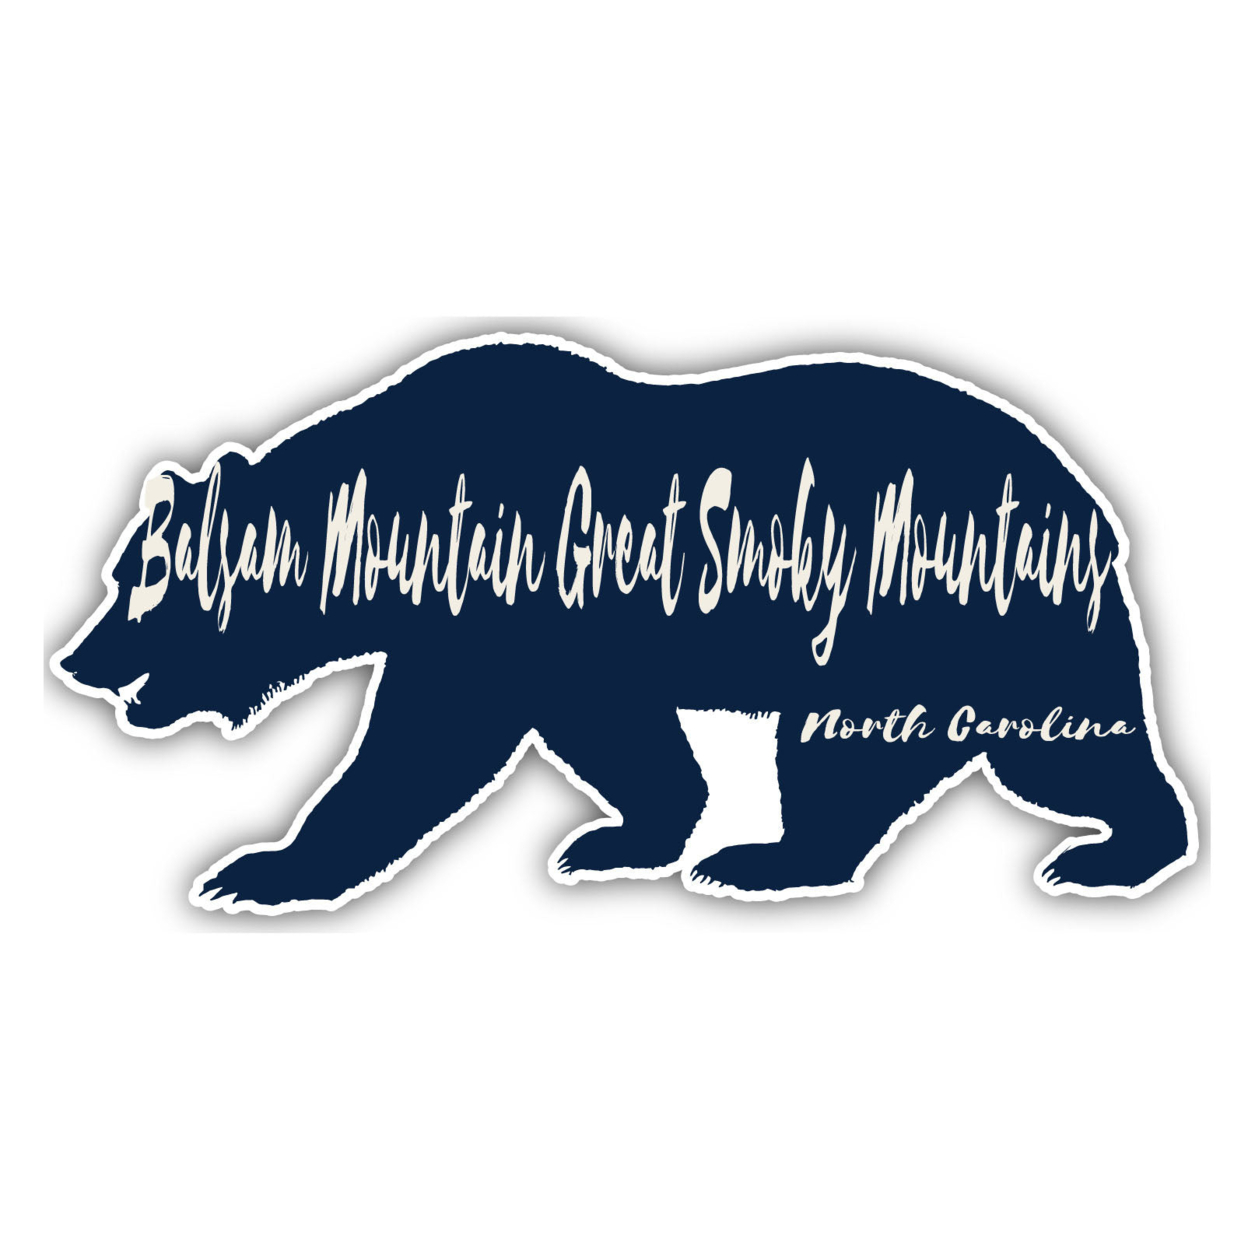 Balsam Mountain Great Smoky Mountains North Carolina Souvenir Decorative Stickers (Choose Theme And Size) - 4-Pack, 12-Inch, Bear